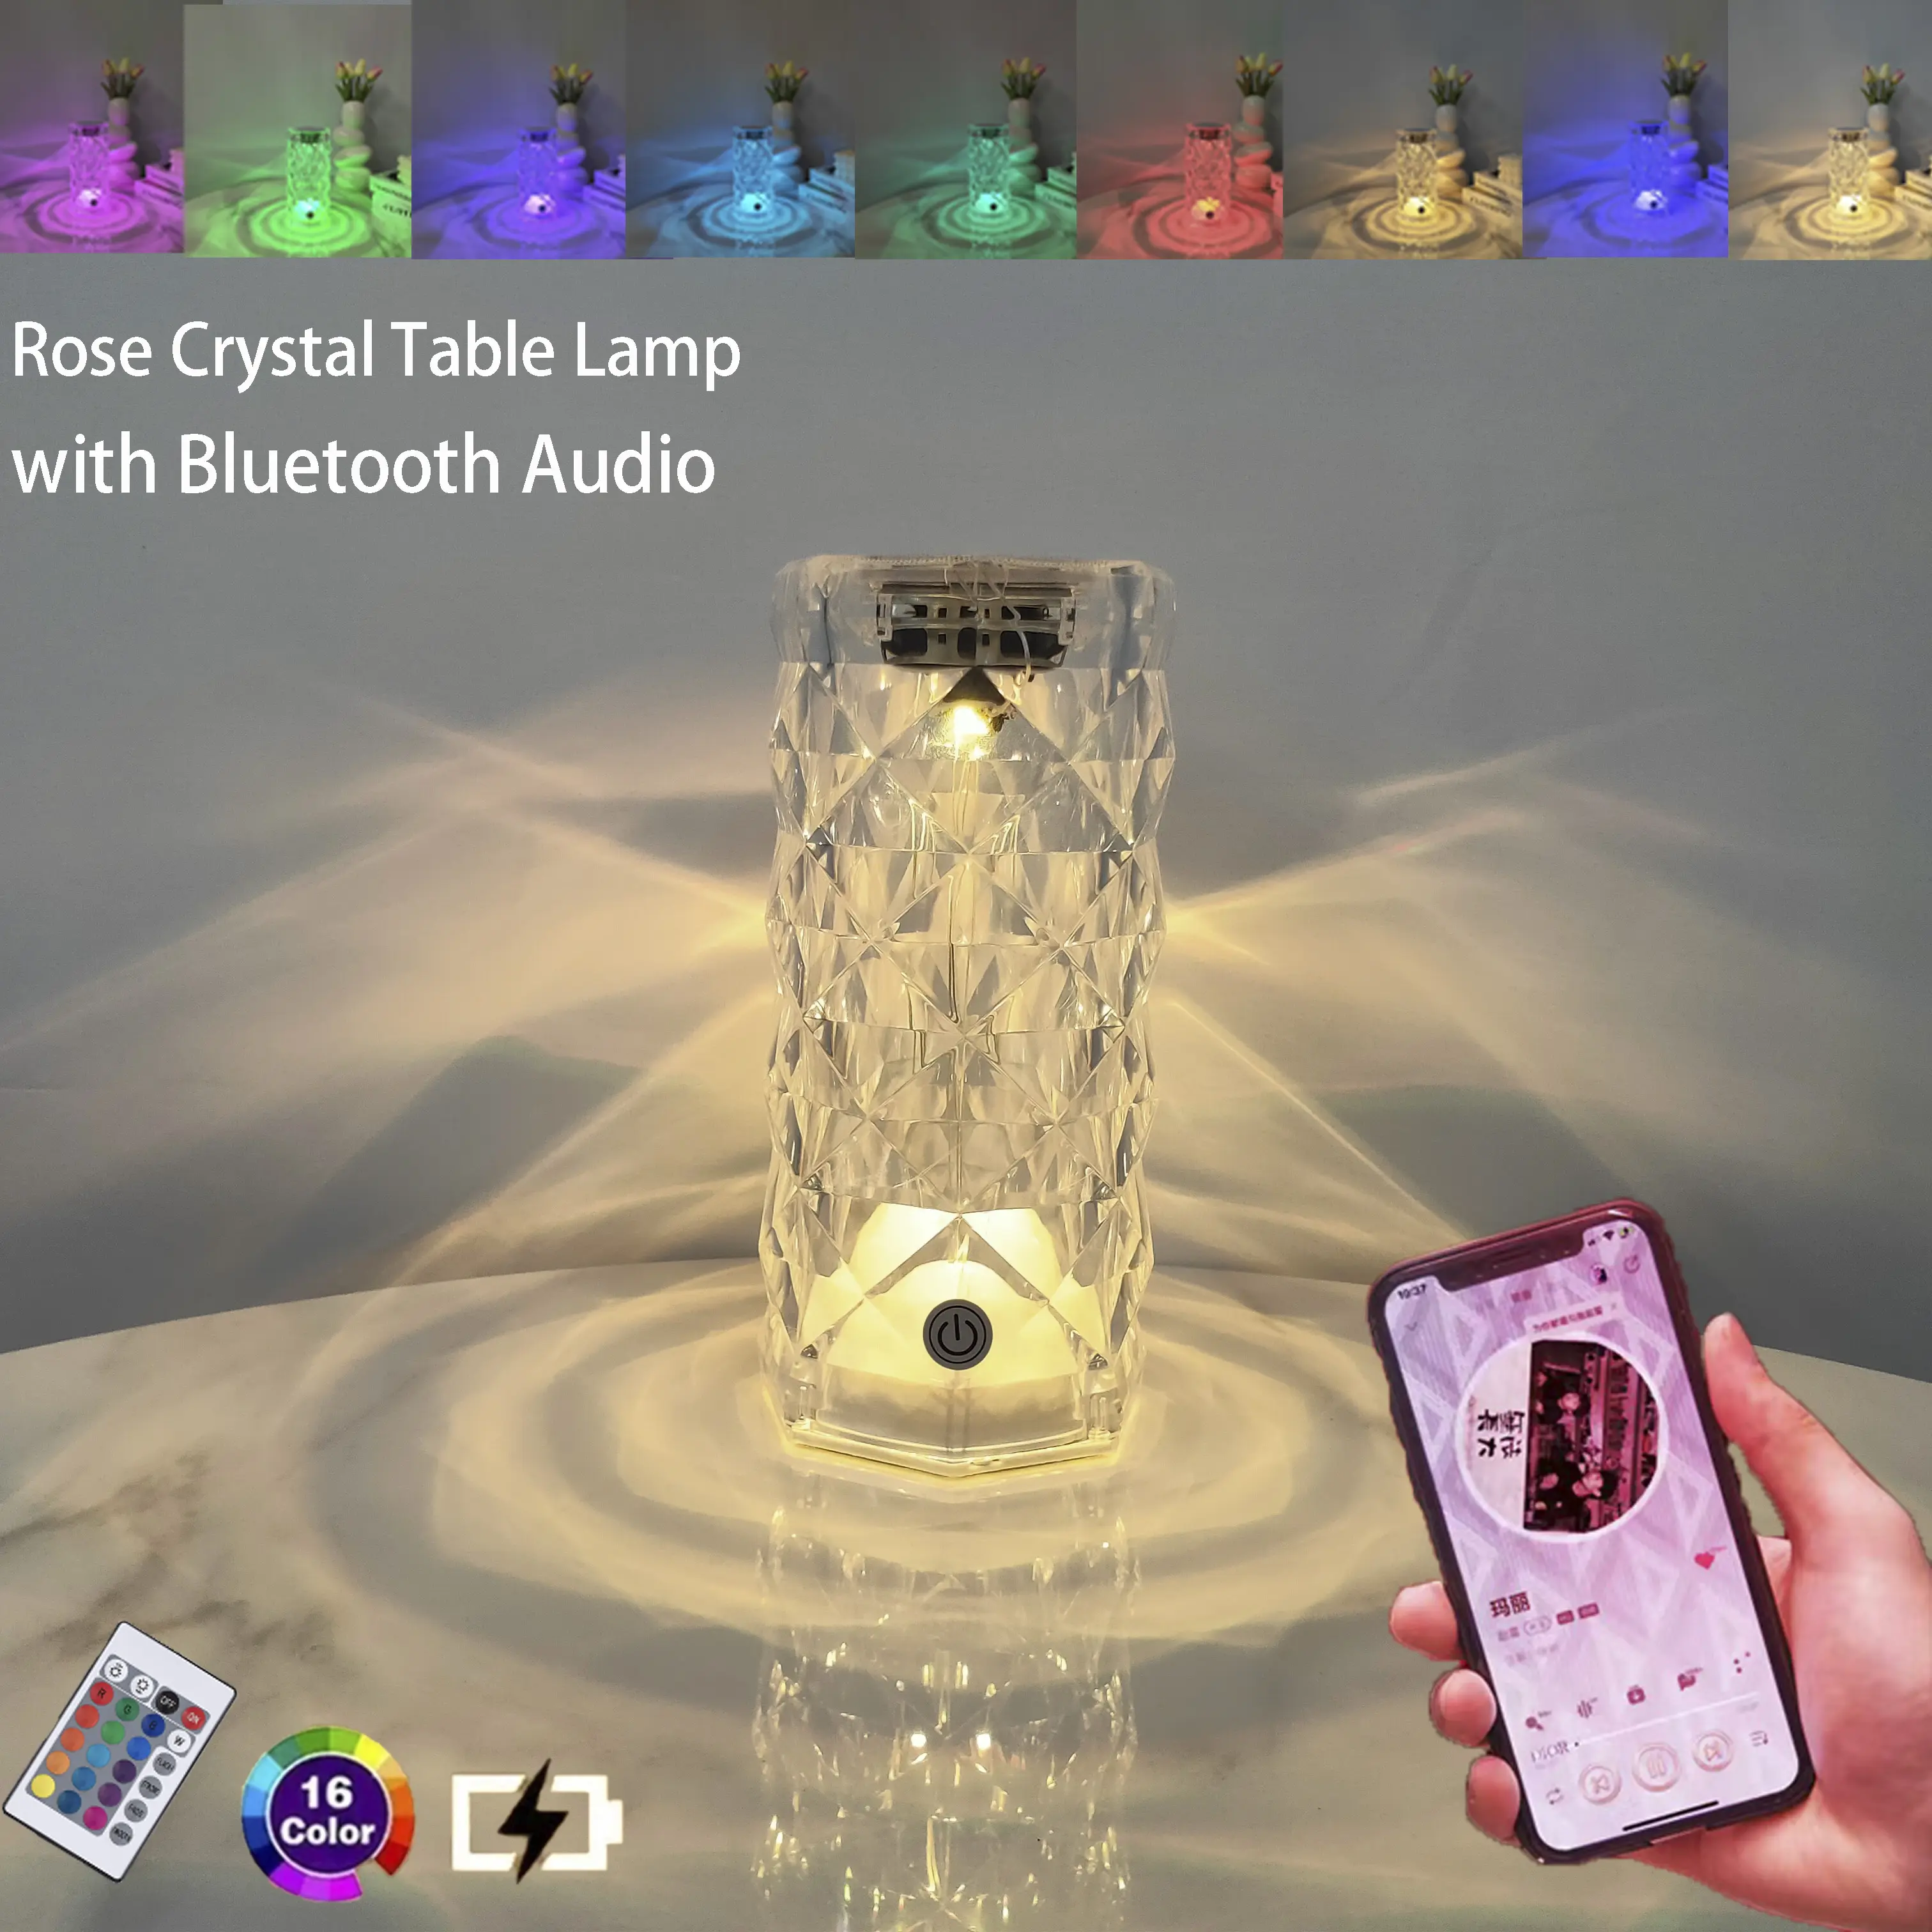 Crystal Table Lamp 16 Colors Night Light Bluetooth Speaker Touch Lamp Projector LED Atmosphere Room Light Decor Room Decoration